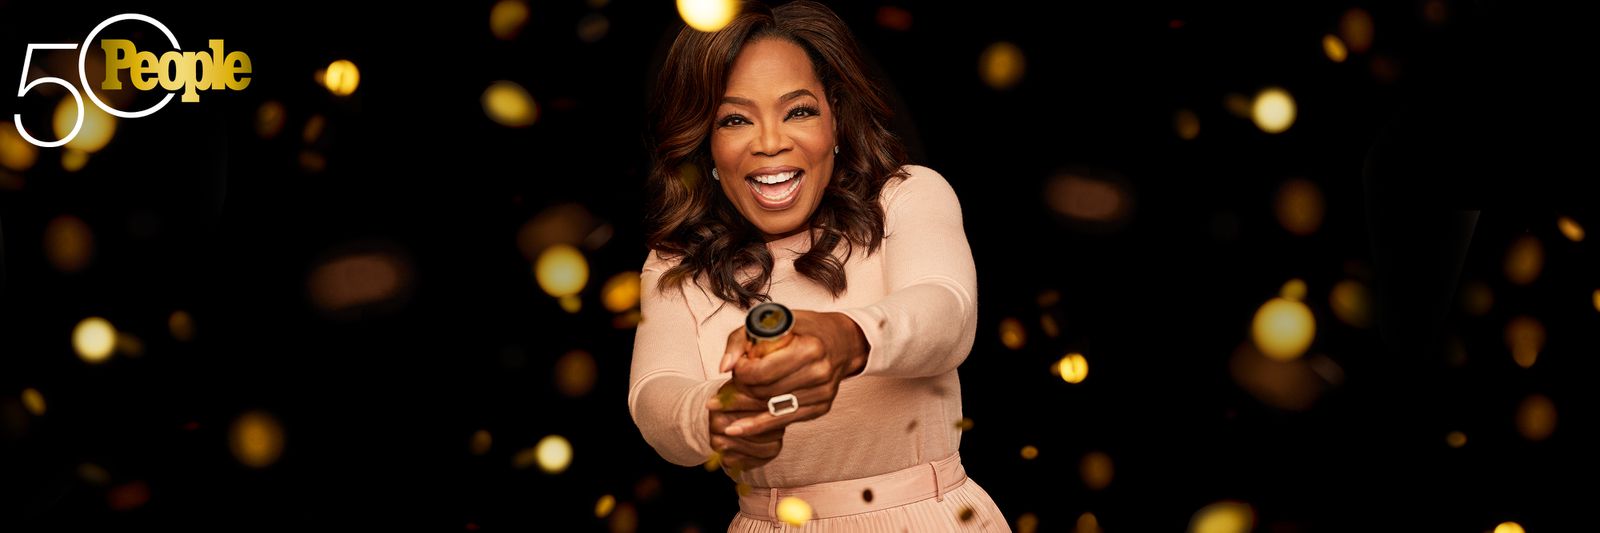 People 50th Anniversary OPRAH WINFREY Photographed 12/4/23 at Smashbox Studios in Culver City, CA.